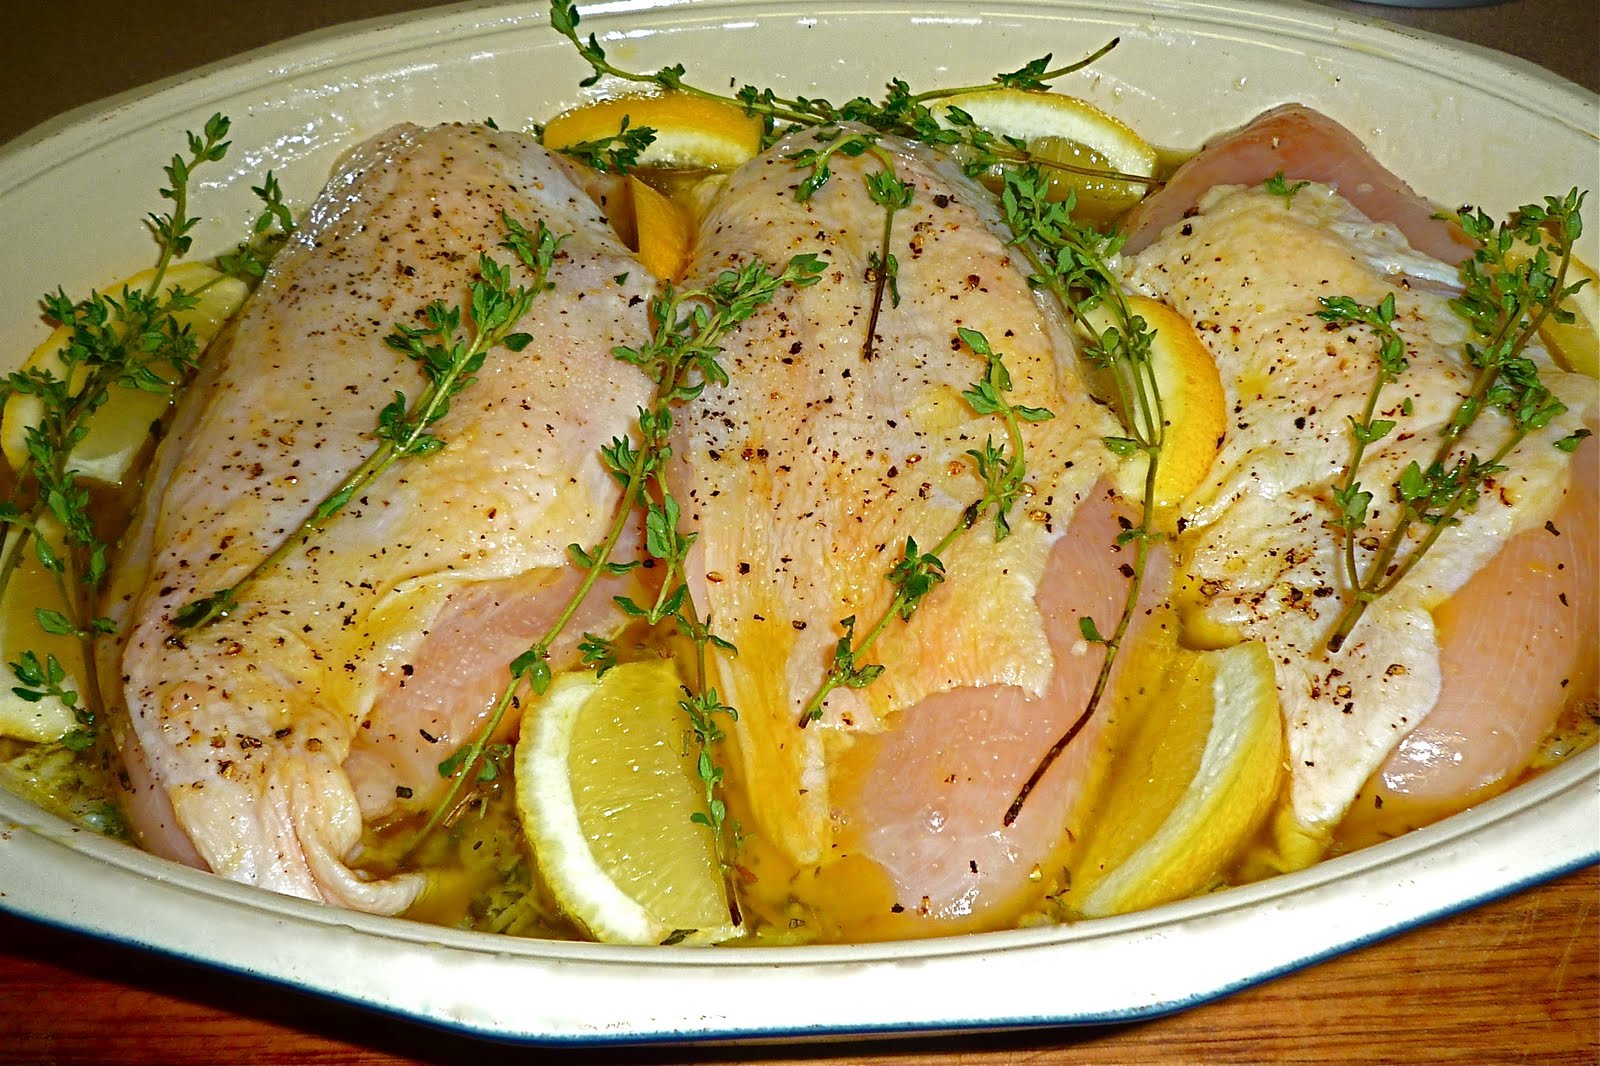 What are some easy roasted chicken recipes?